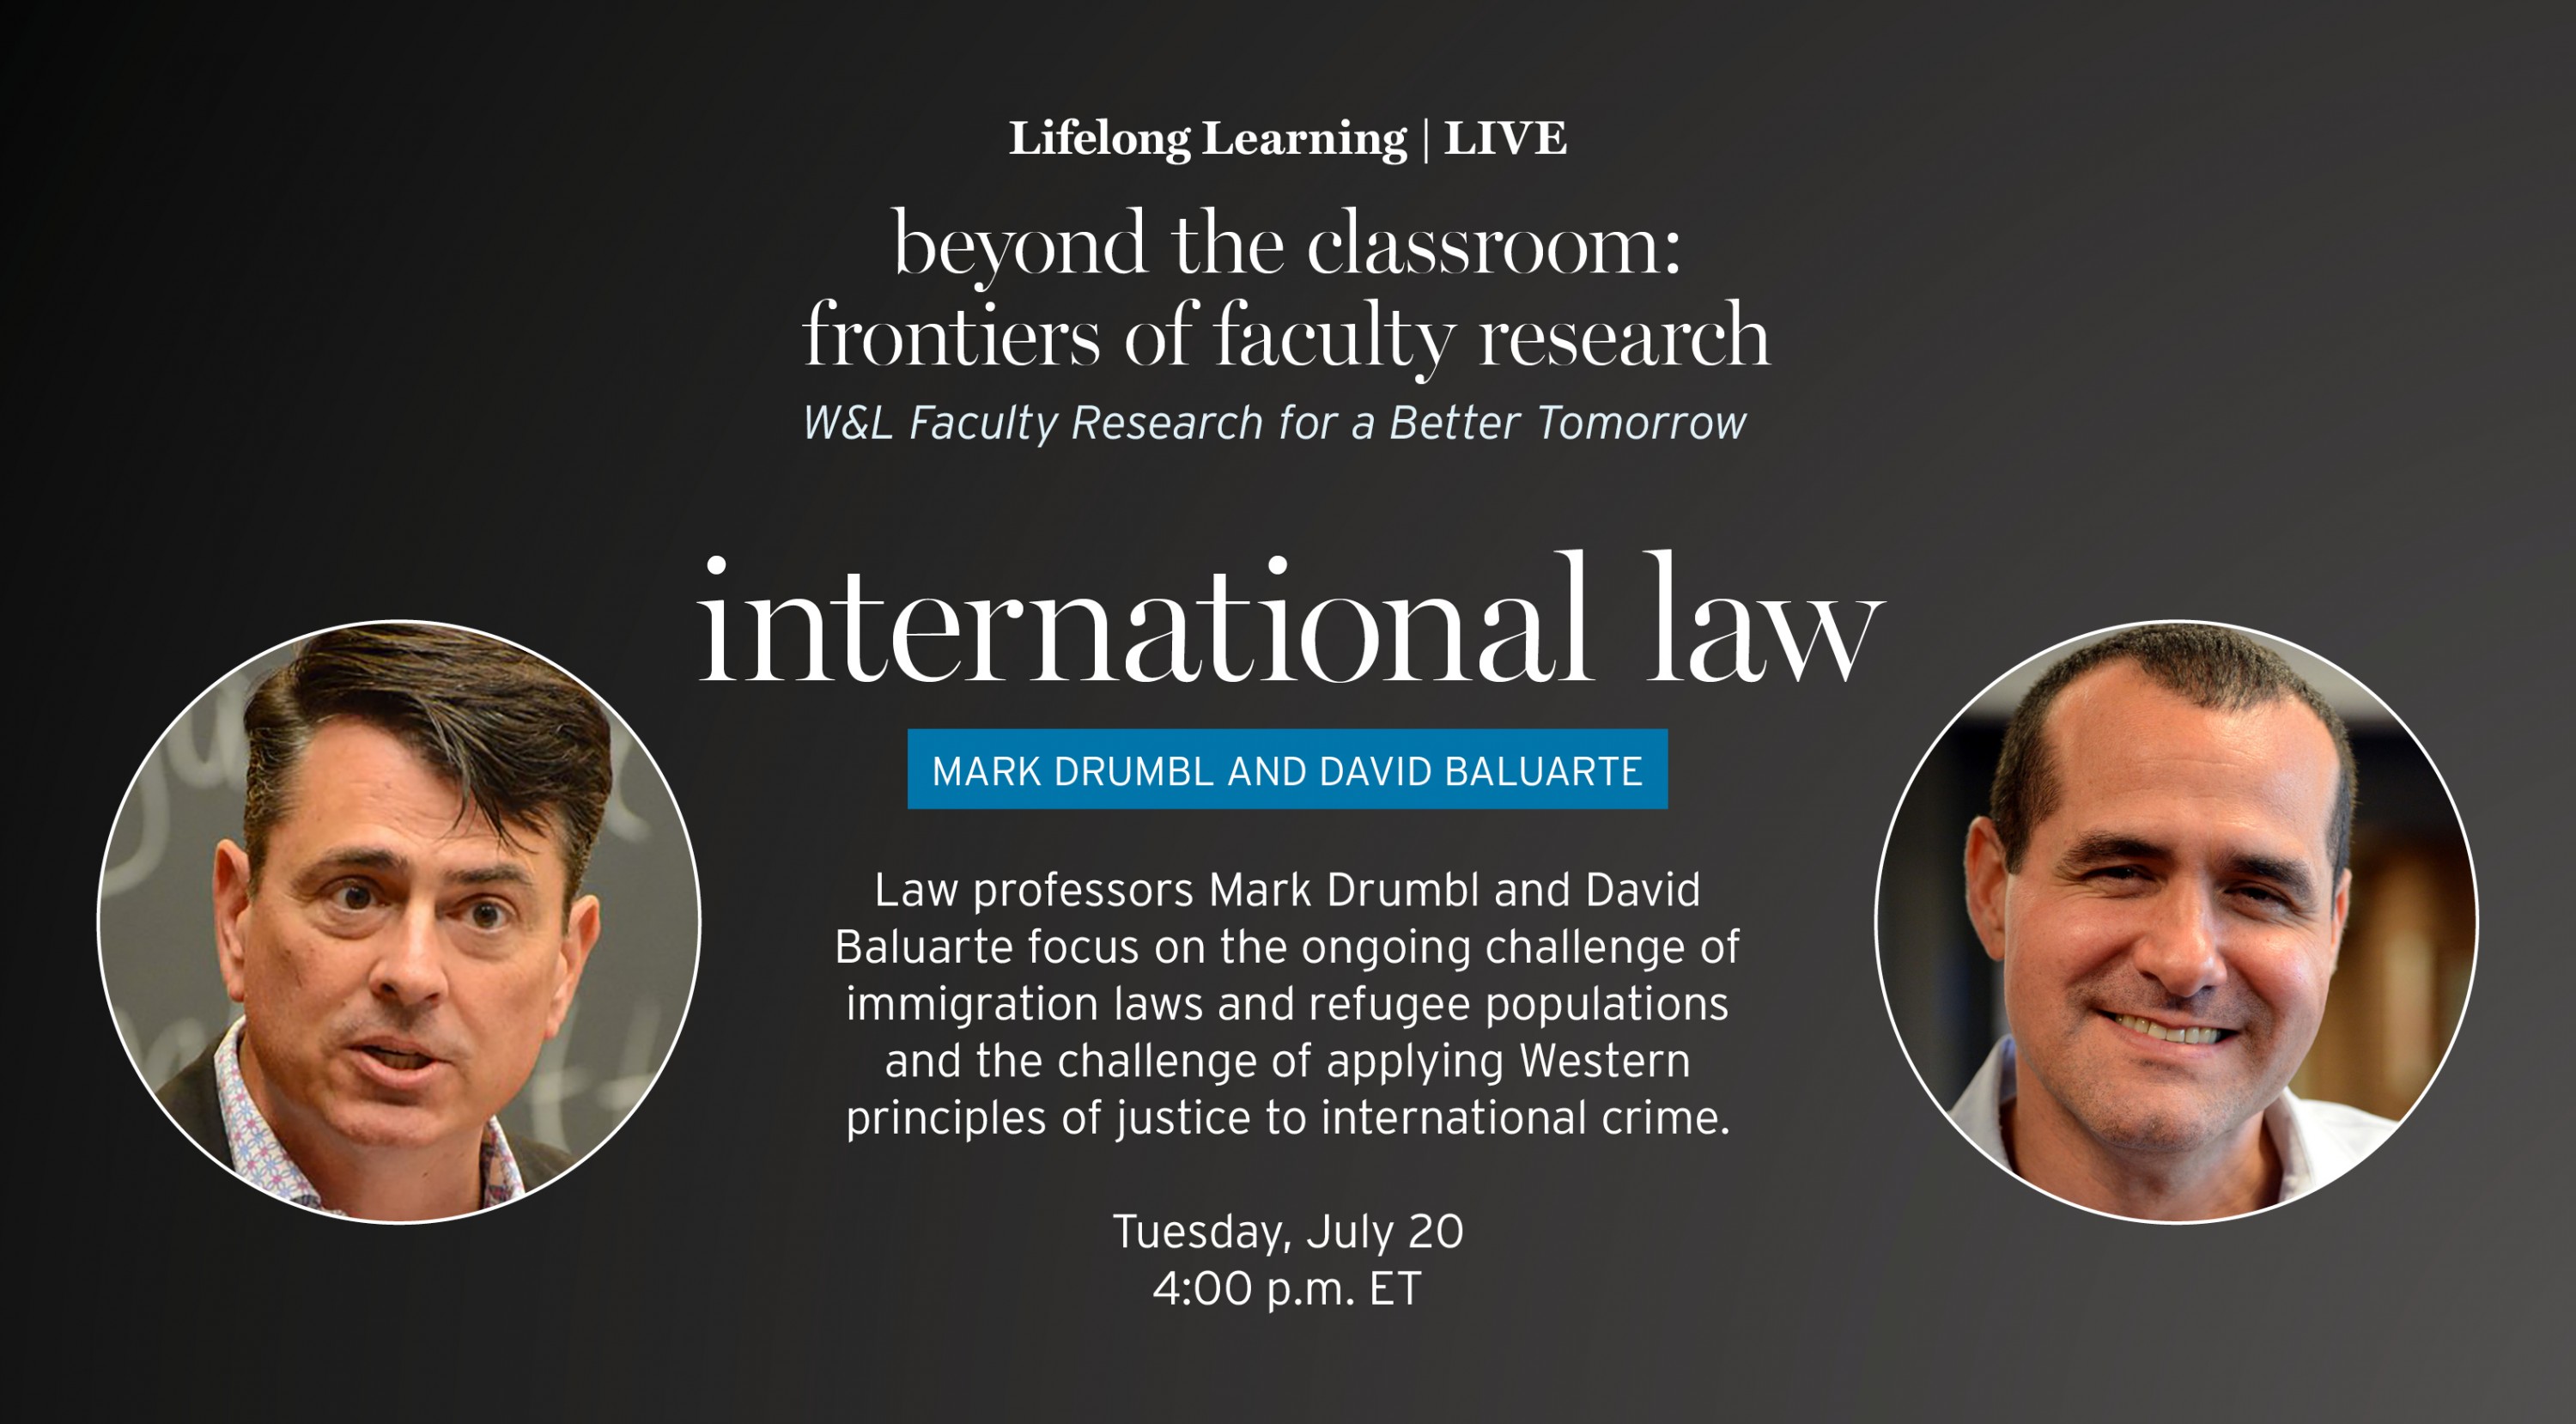 An image promoting the International Law presentation, part of the Beyond the Classroom: Frontiers of Faculty Research series